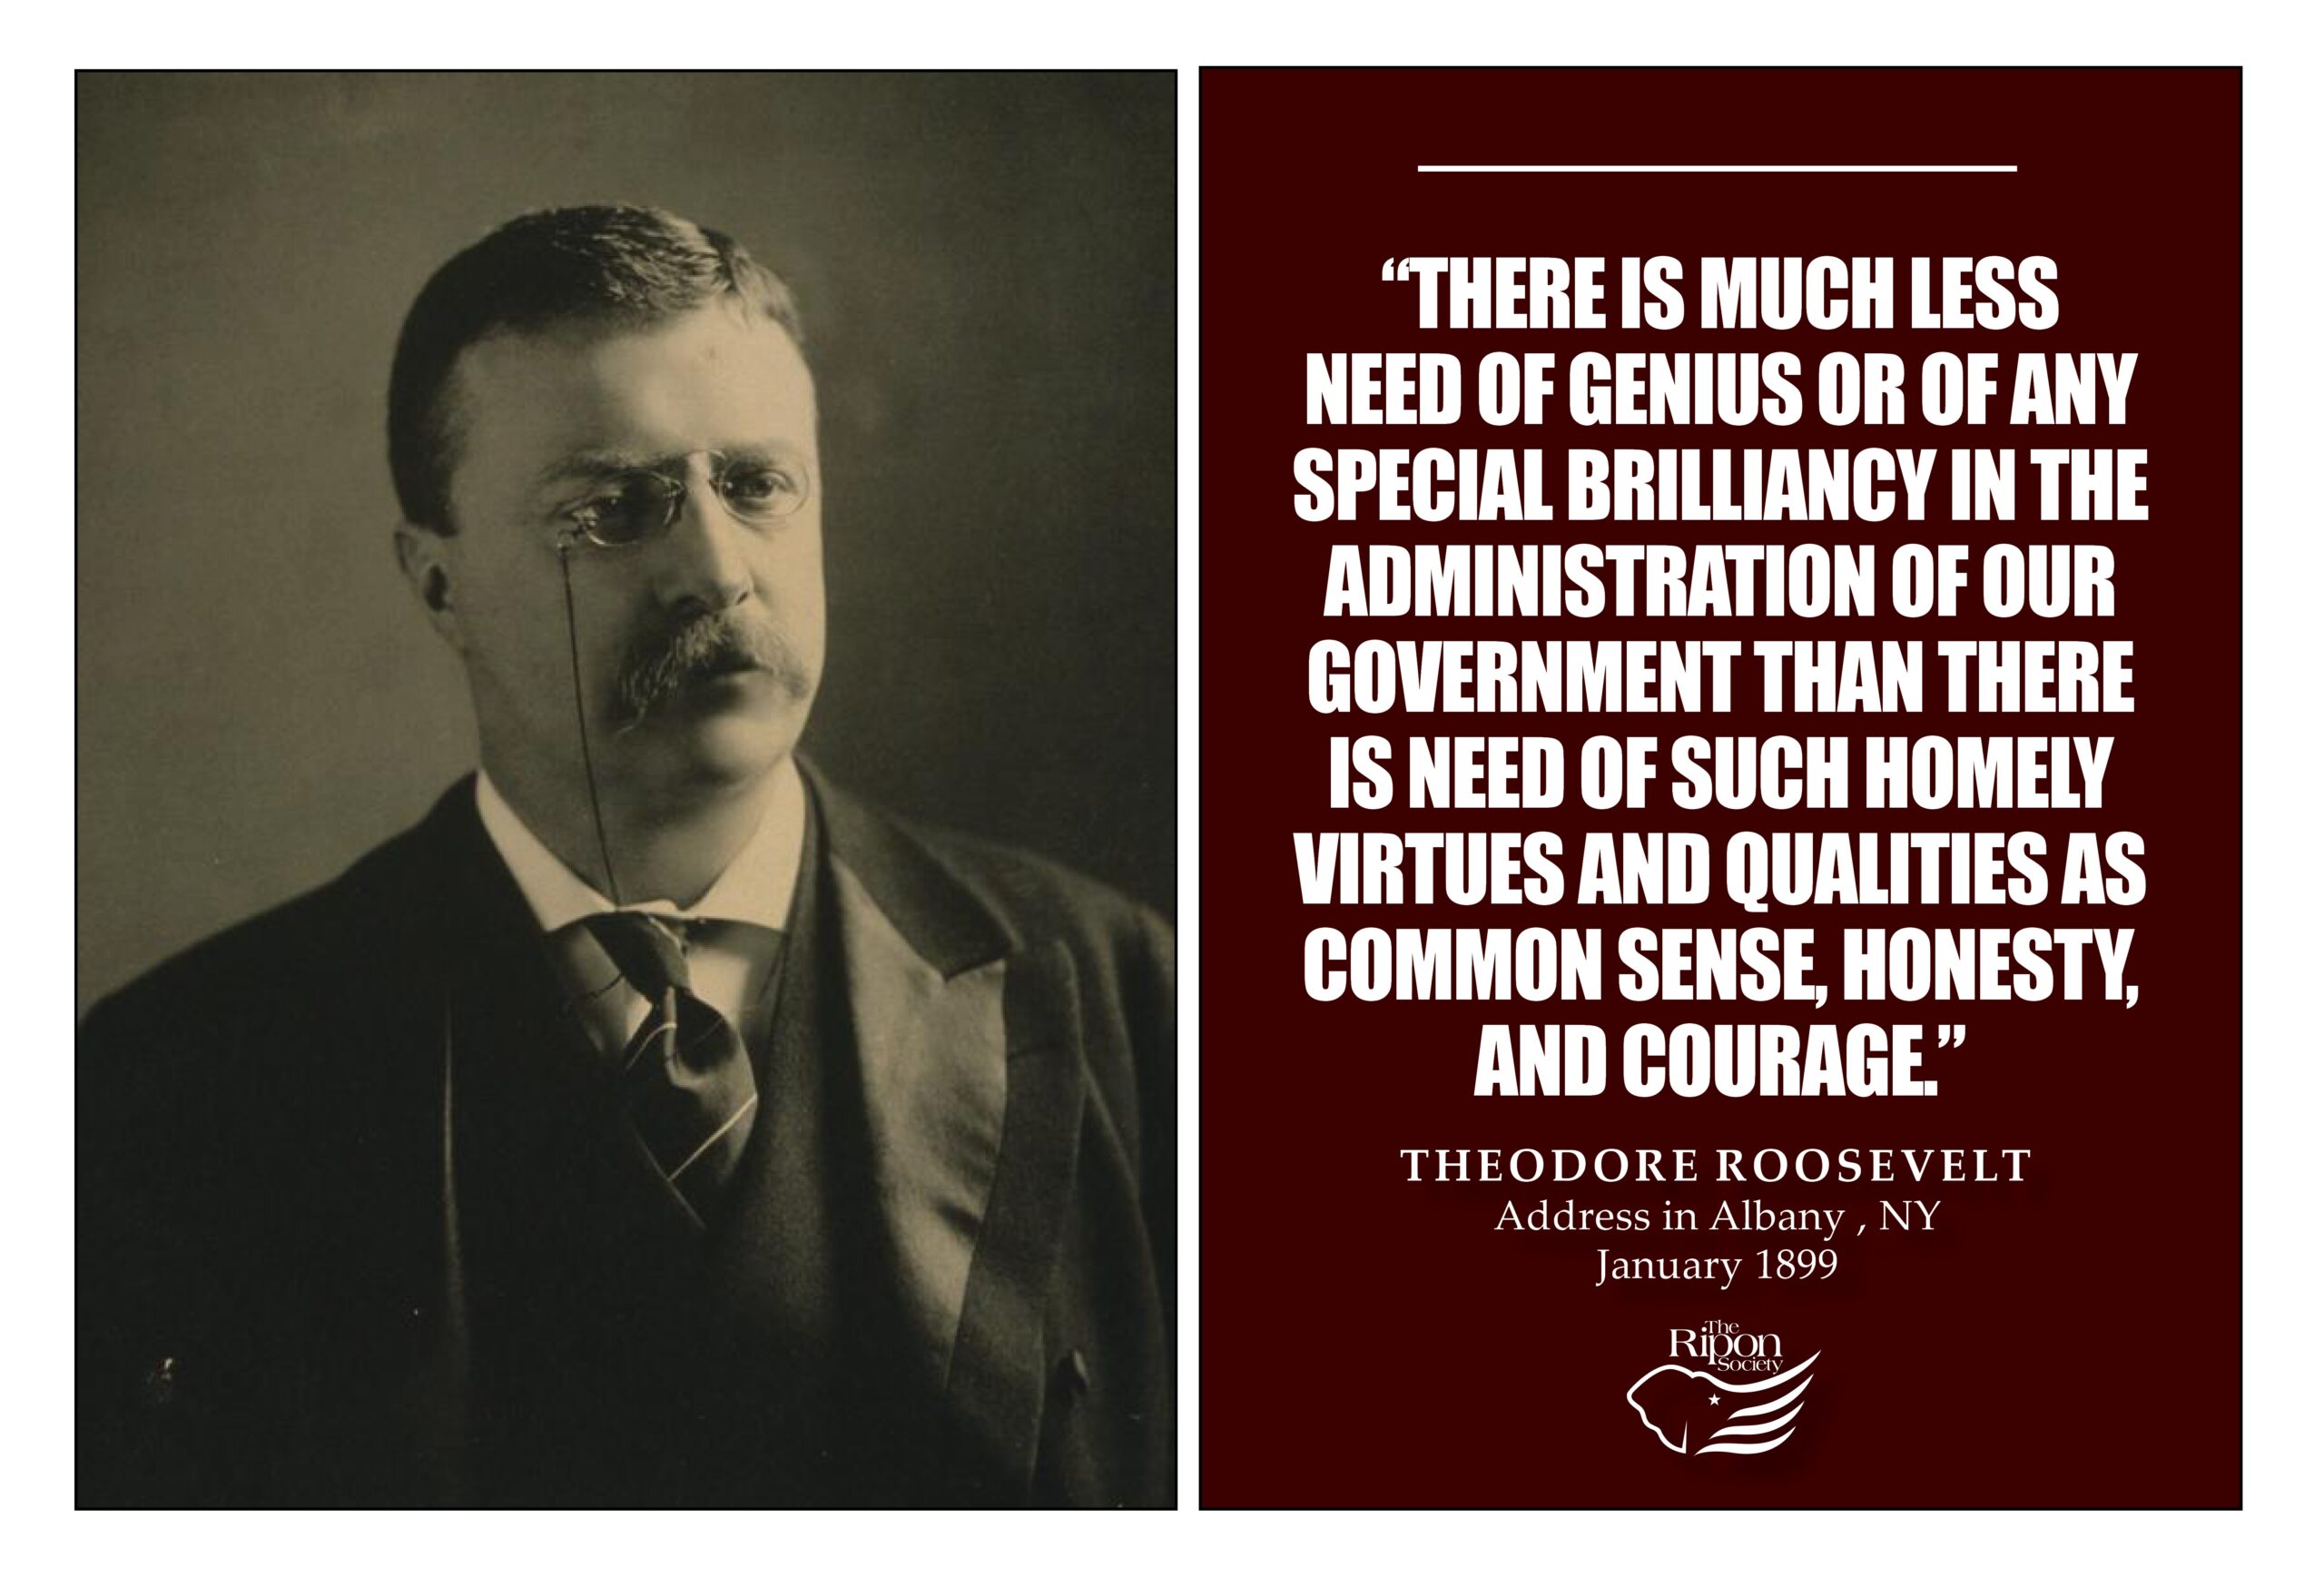 “There is much less need of genius or of any special brilliancy in the administration of our government than there is need of such homely virtues and qualities as common sense, honesty, and courage.”

Address in Albany, New York, January 1899
